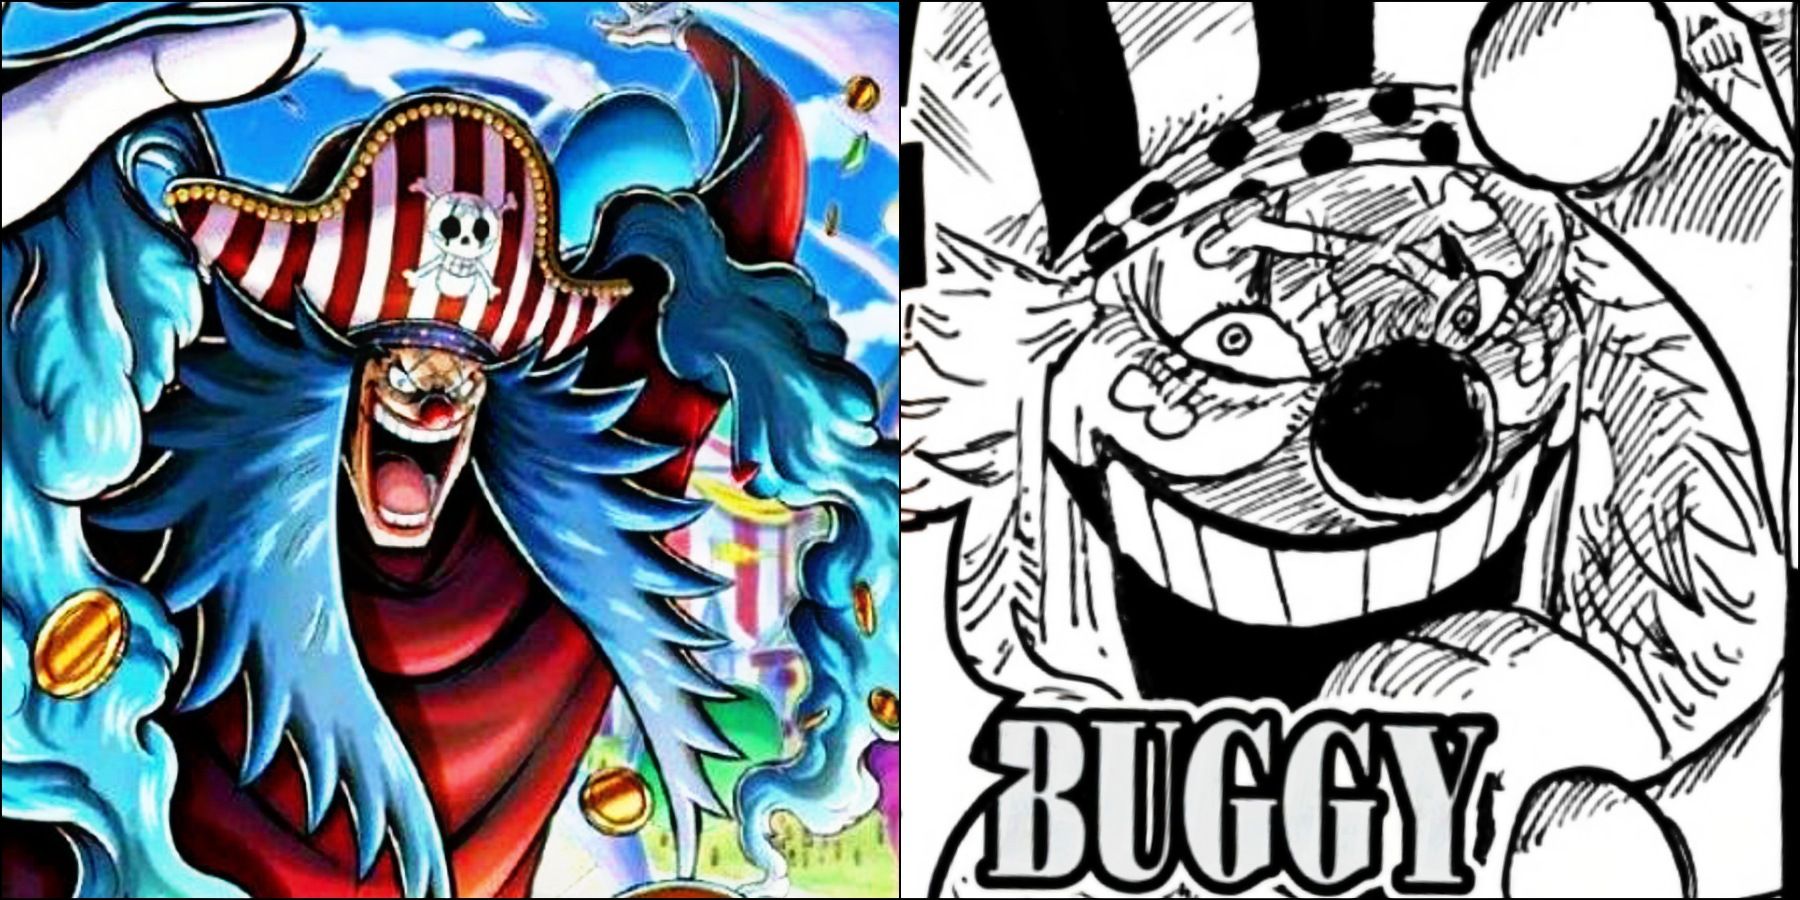 So That's Why they Think Buggy is a Yonko! - RJ Writing Ink